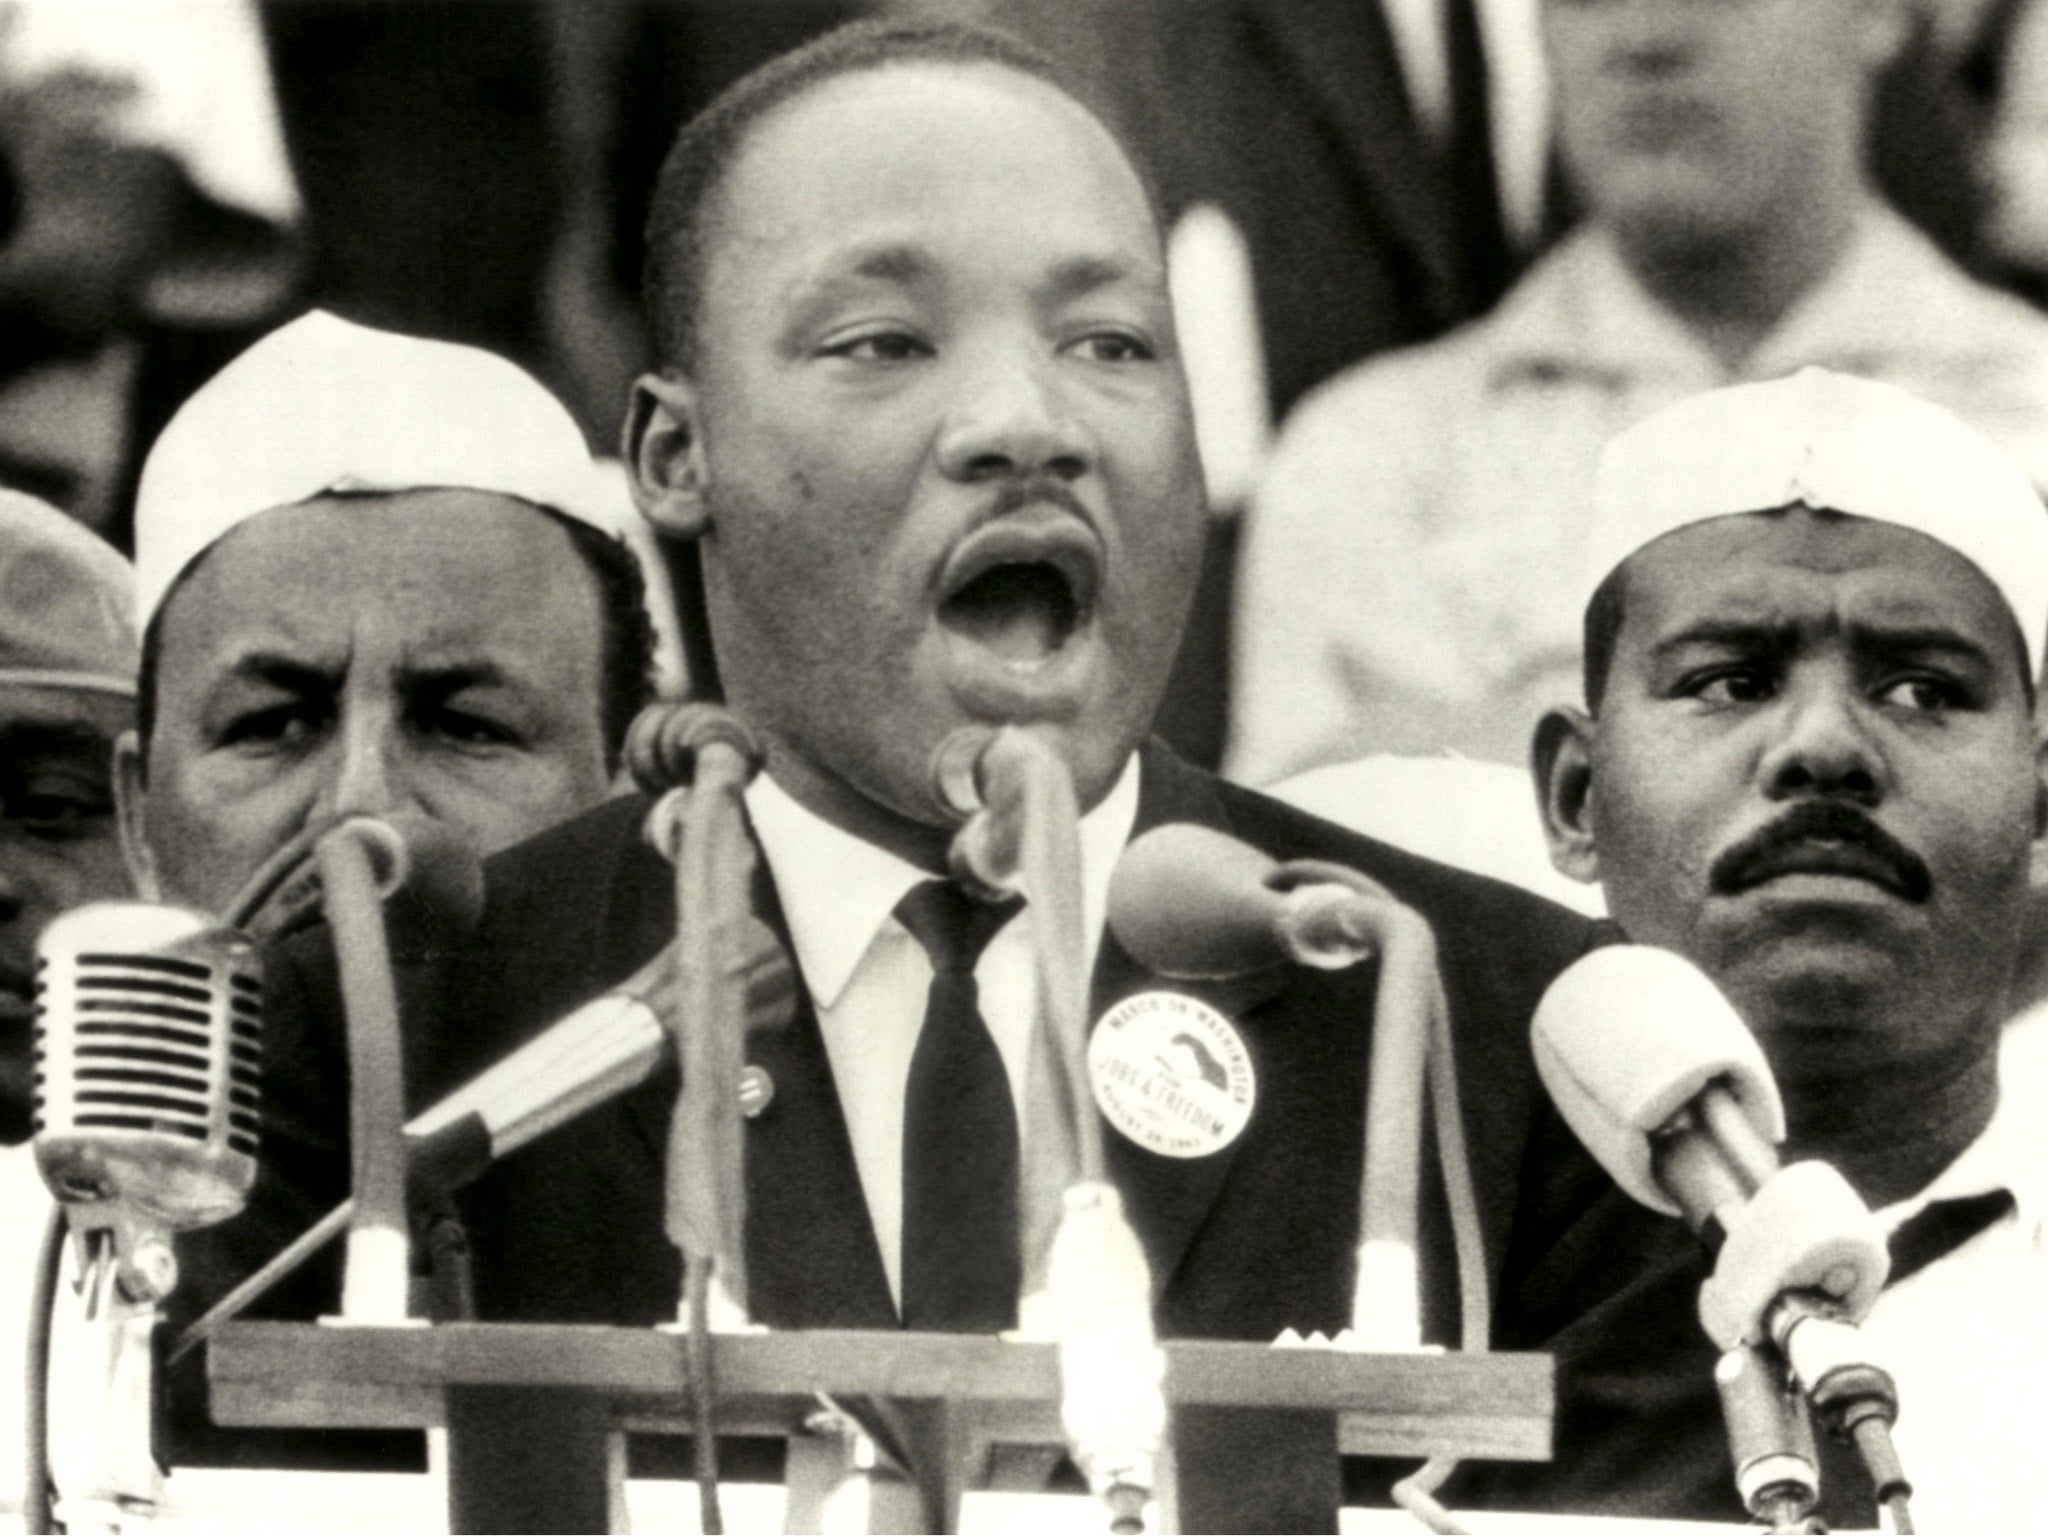 Martin Luther King delivers his Dream Speech in Washington DC